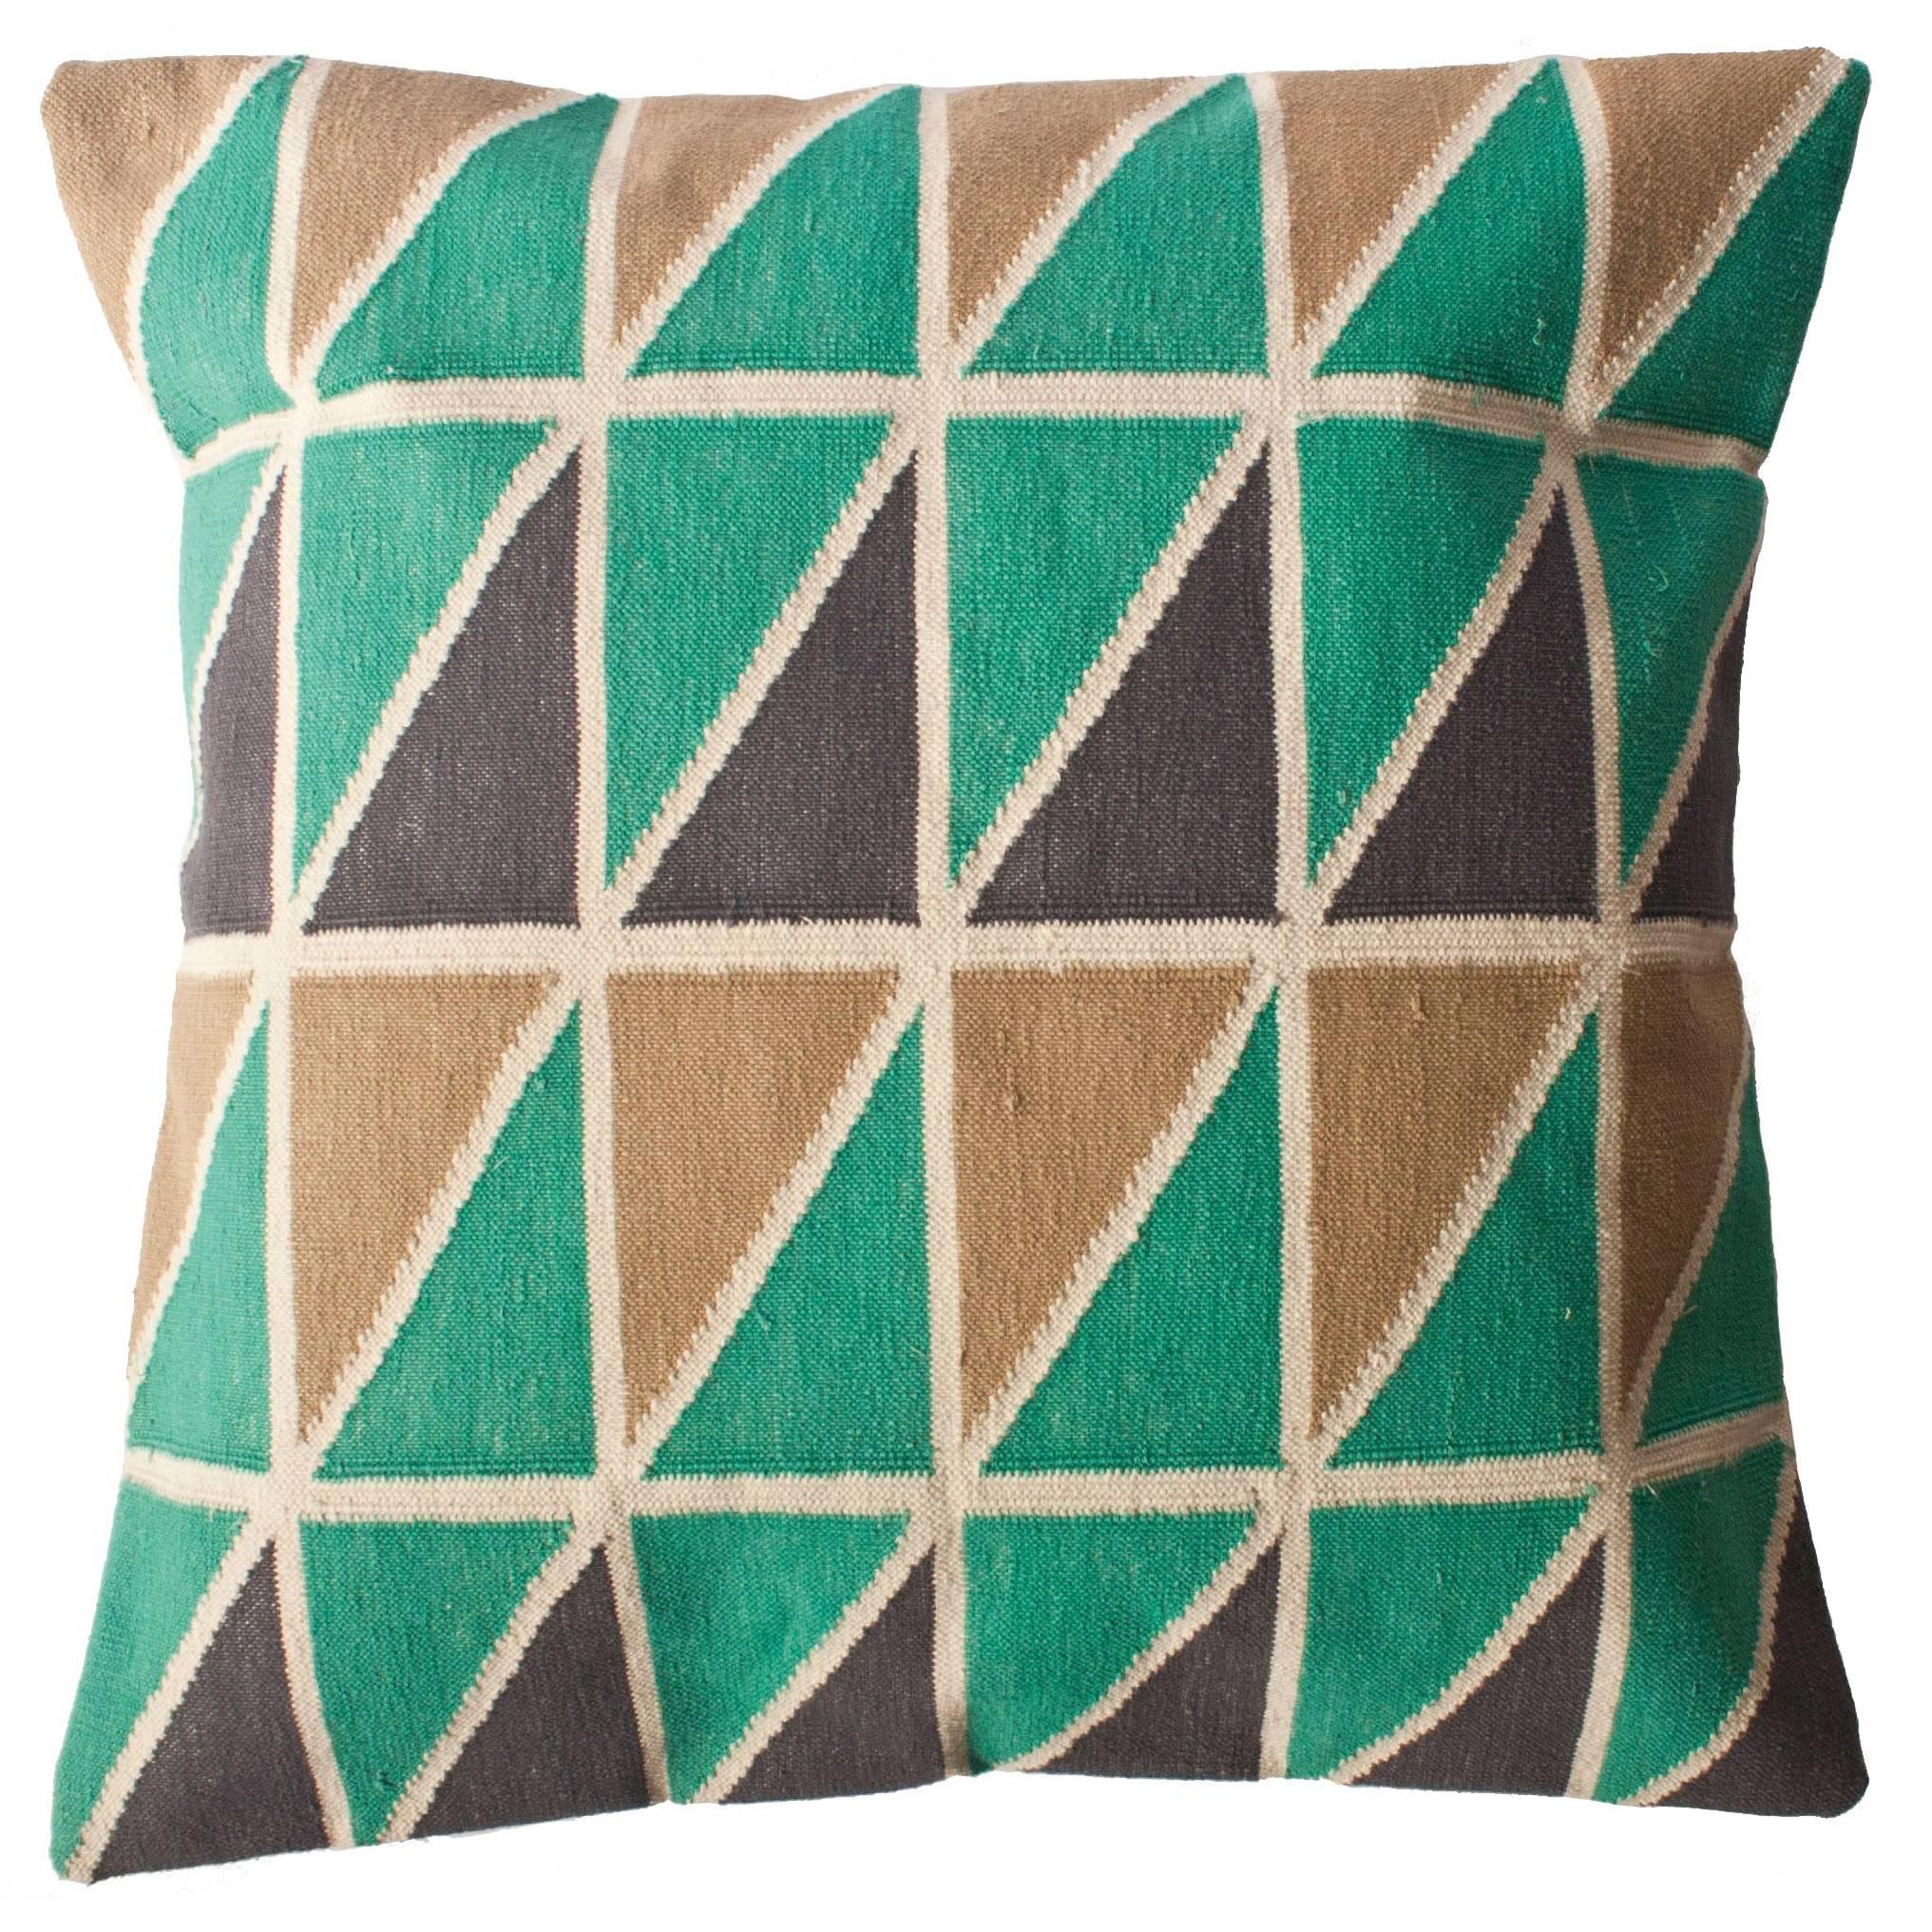 Geometric Mave Handwoven Modern Triangle Throw Pillow Cover